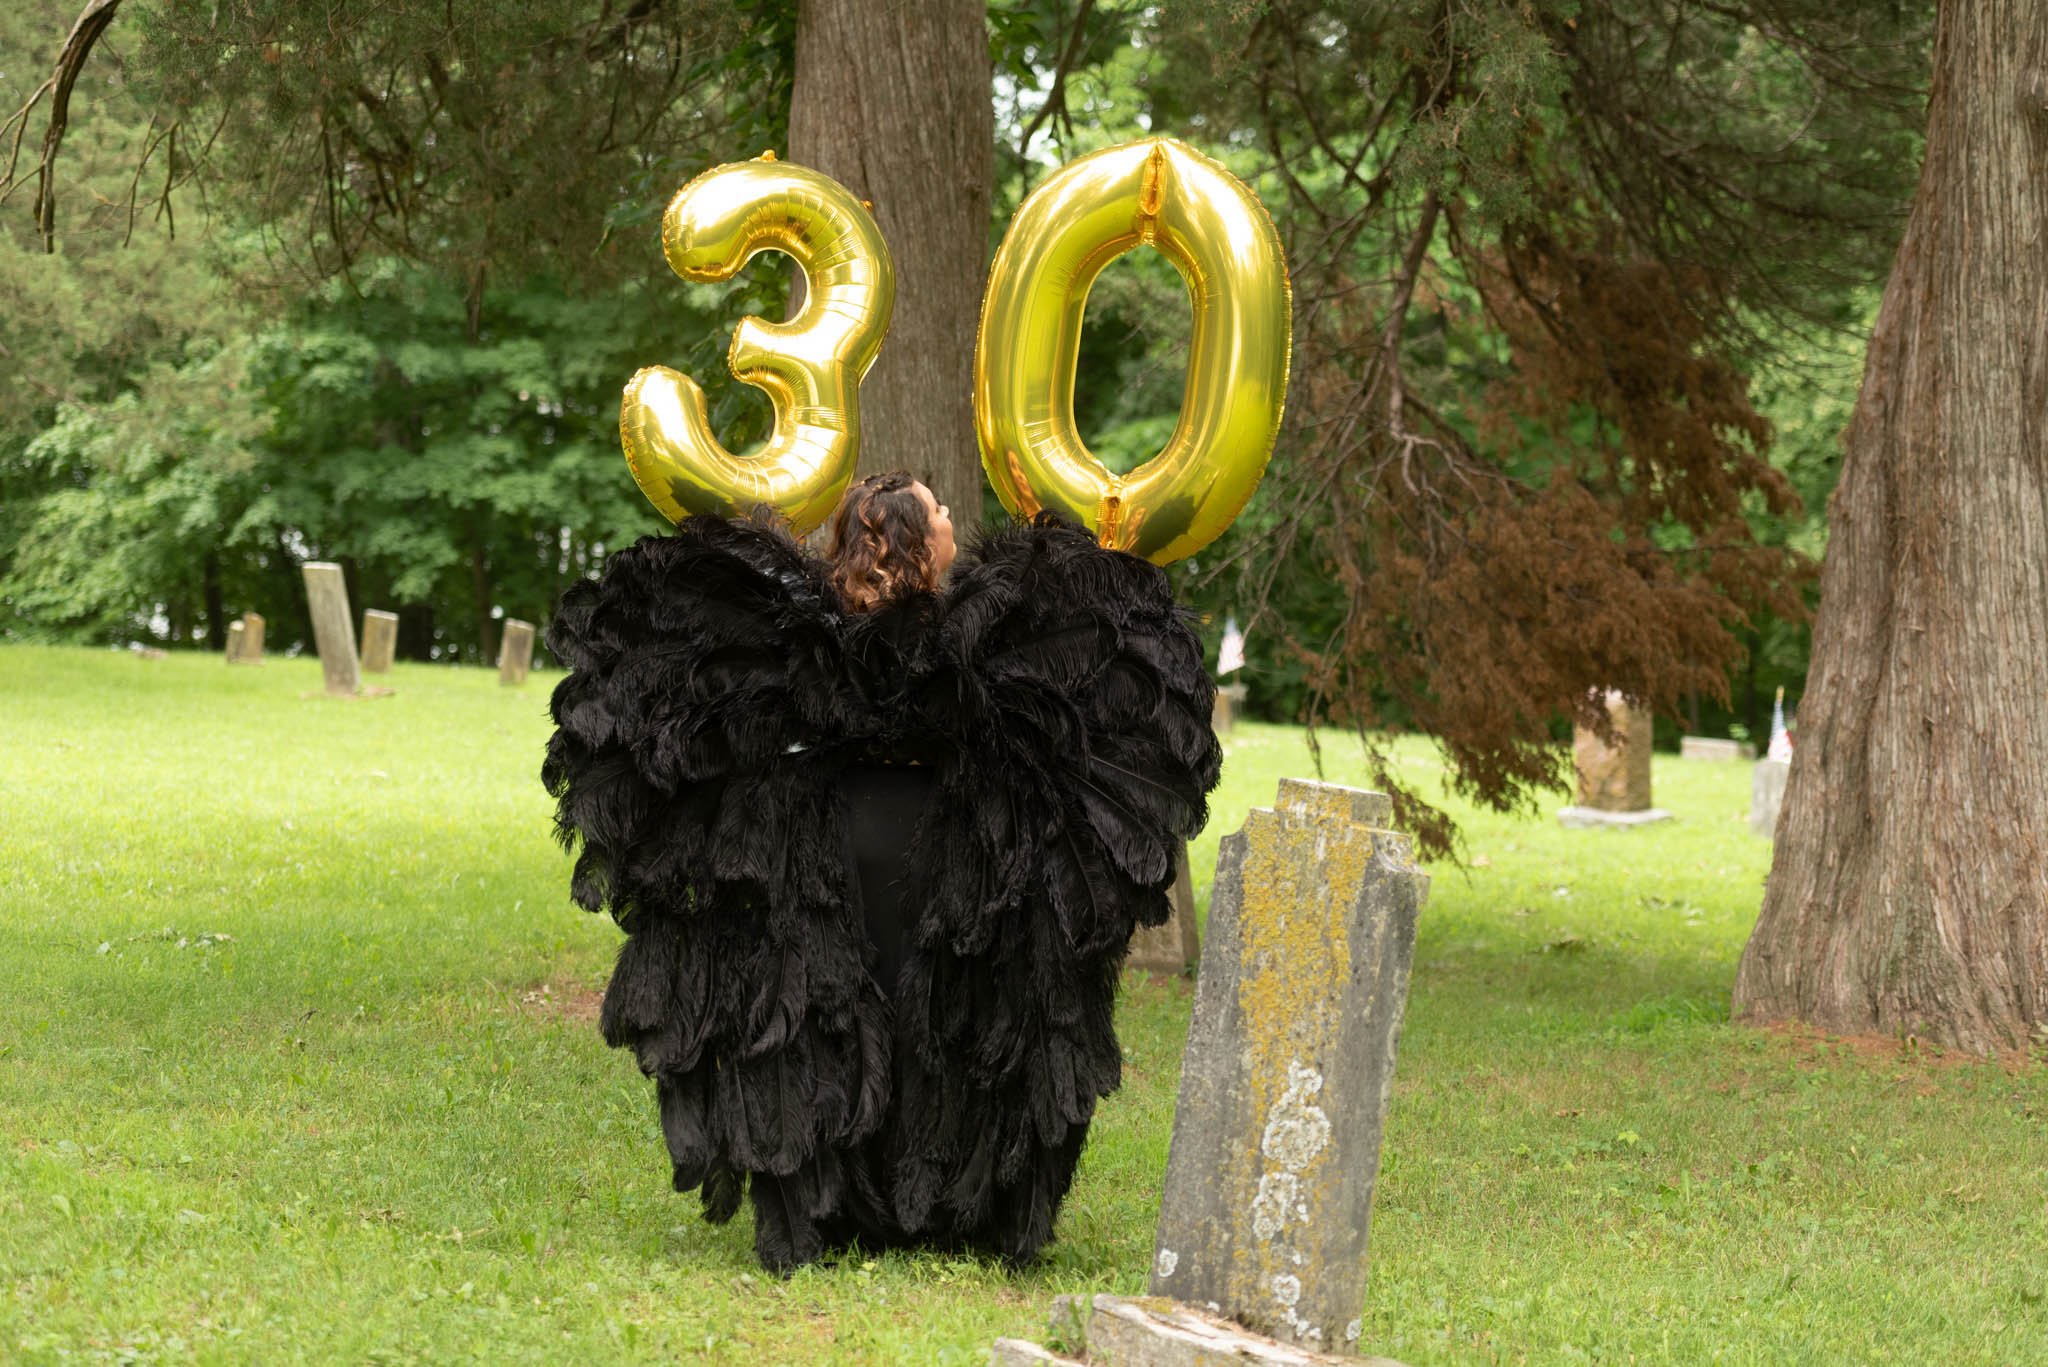  Samantha poses with her back to the camera and displays the number 30 on gold foil balloon letters as she wears black angel wings. 